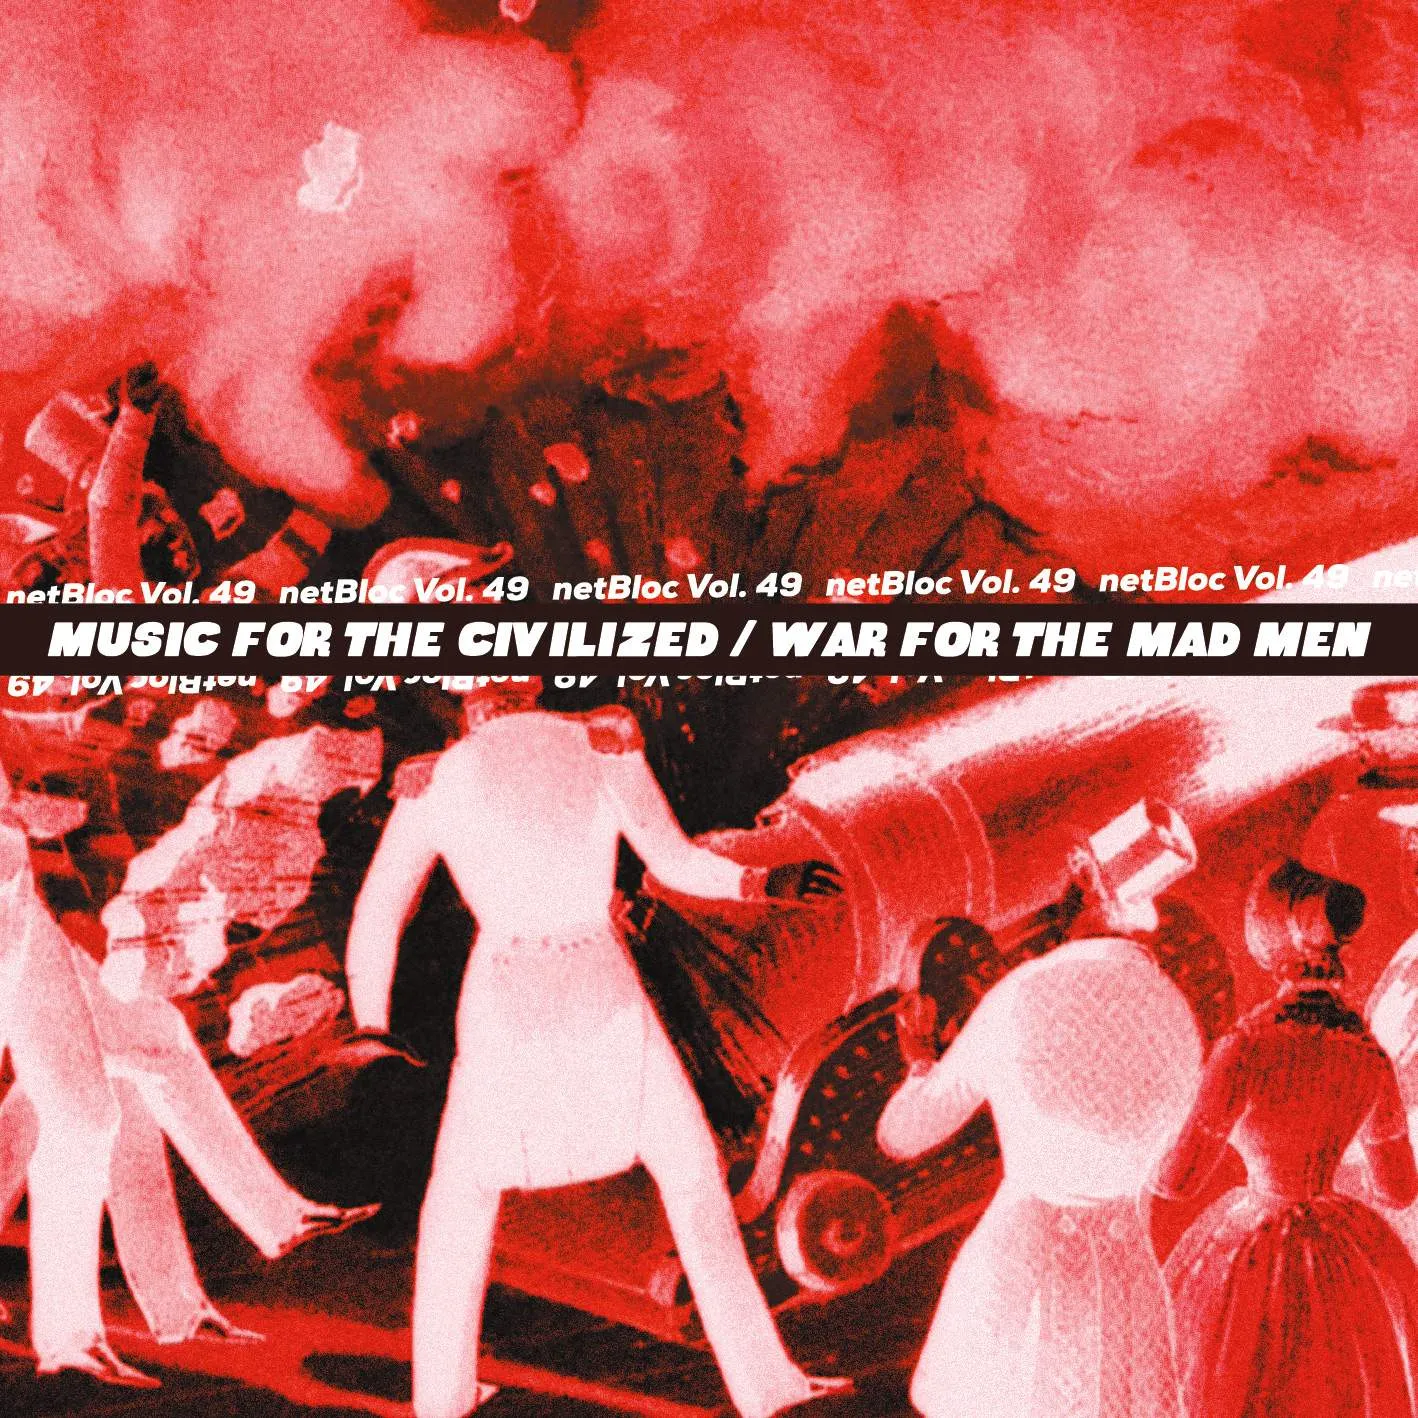 Album cover for “netBloc Vol. 49: Music For The Civilized / War For The Mad Men” by Various Artists